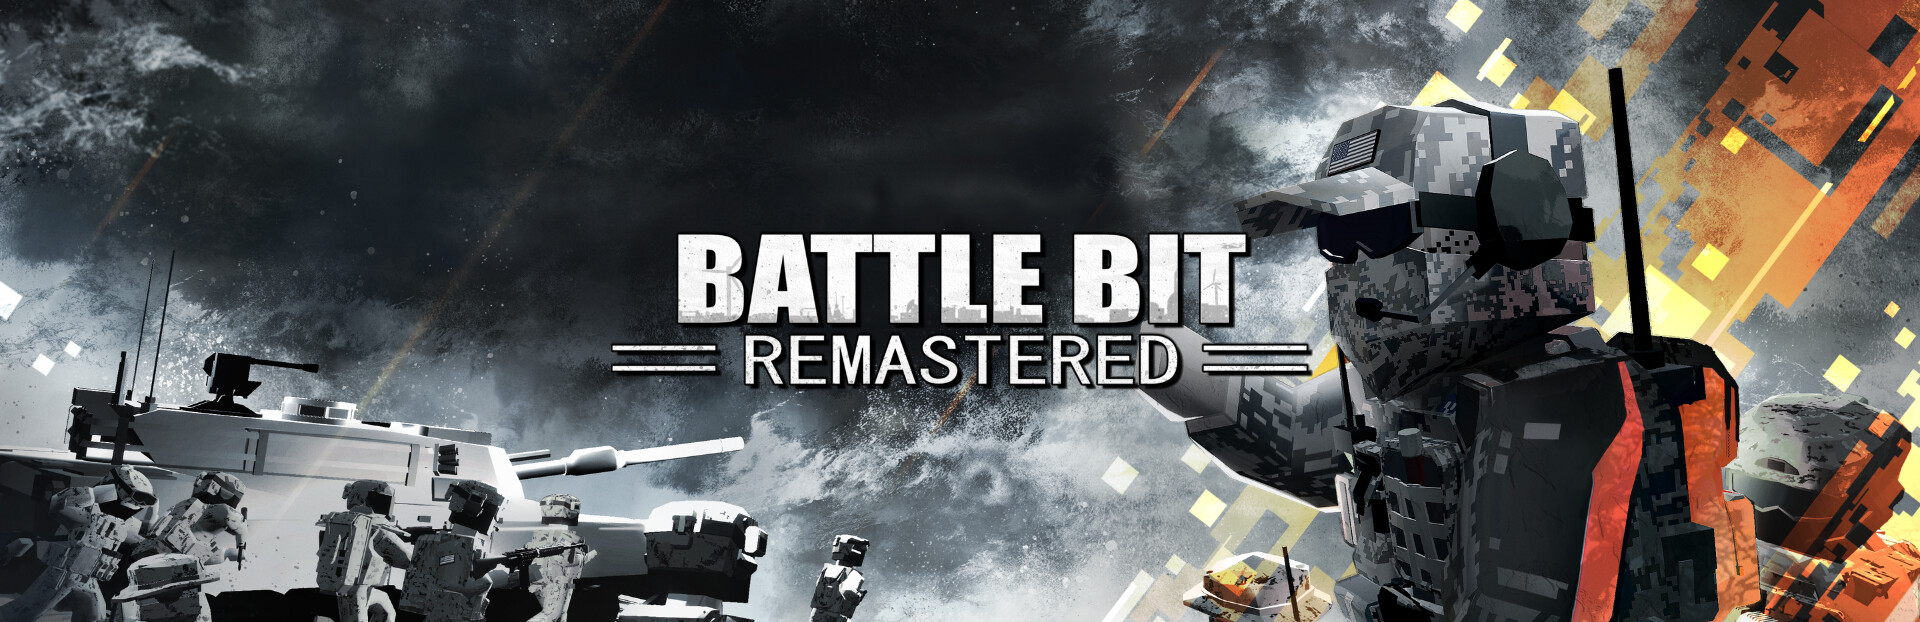 BattleBit Remastered: how did it sell millions?